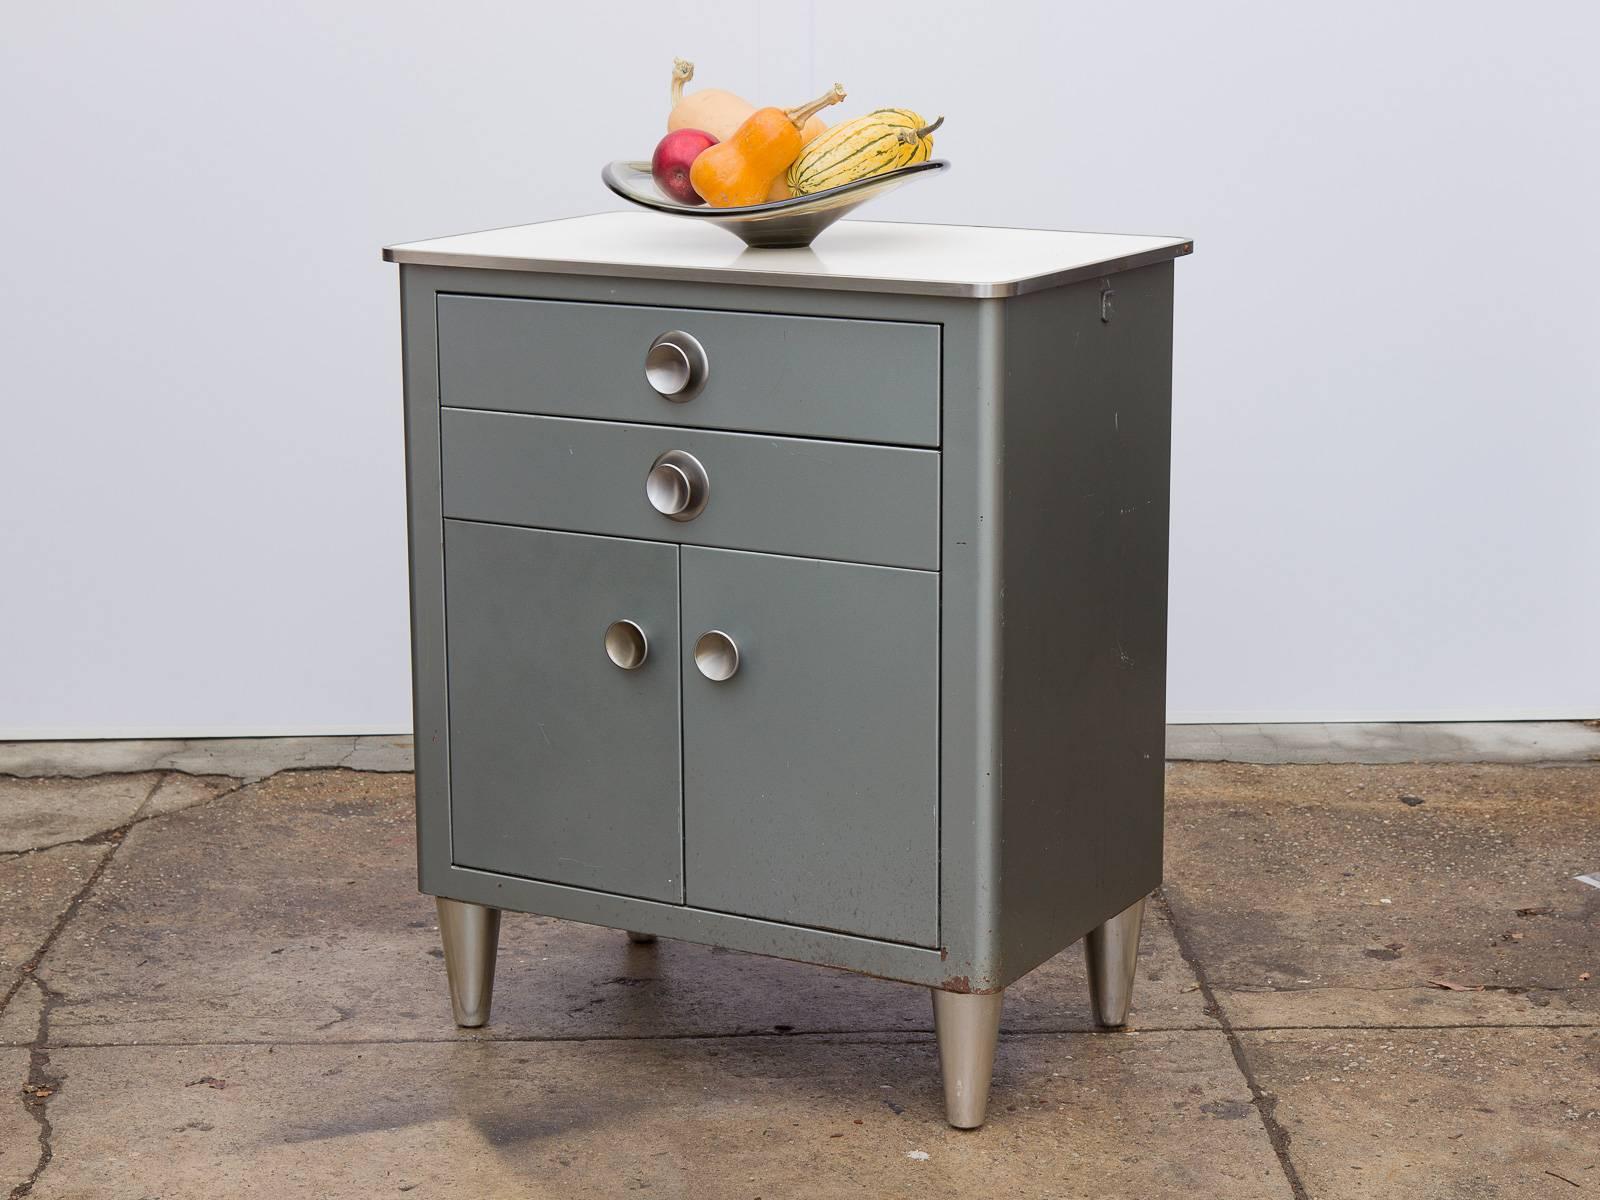 Mid-20th Century Small Modern Industrial Storage Cabinet